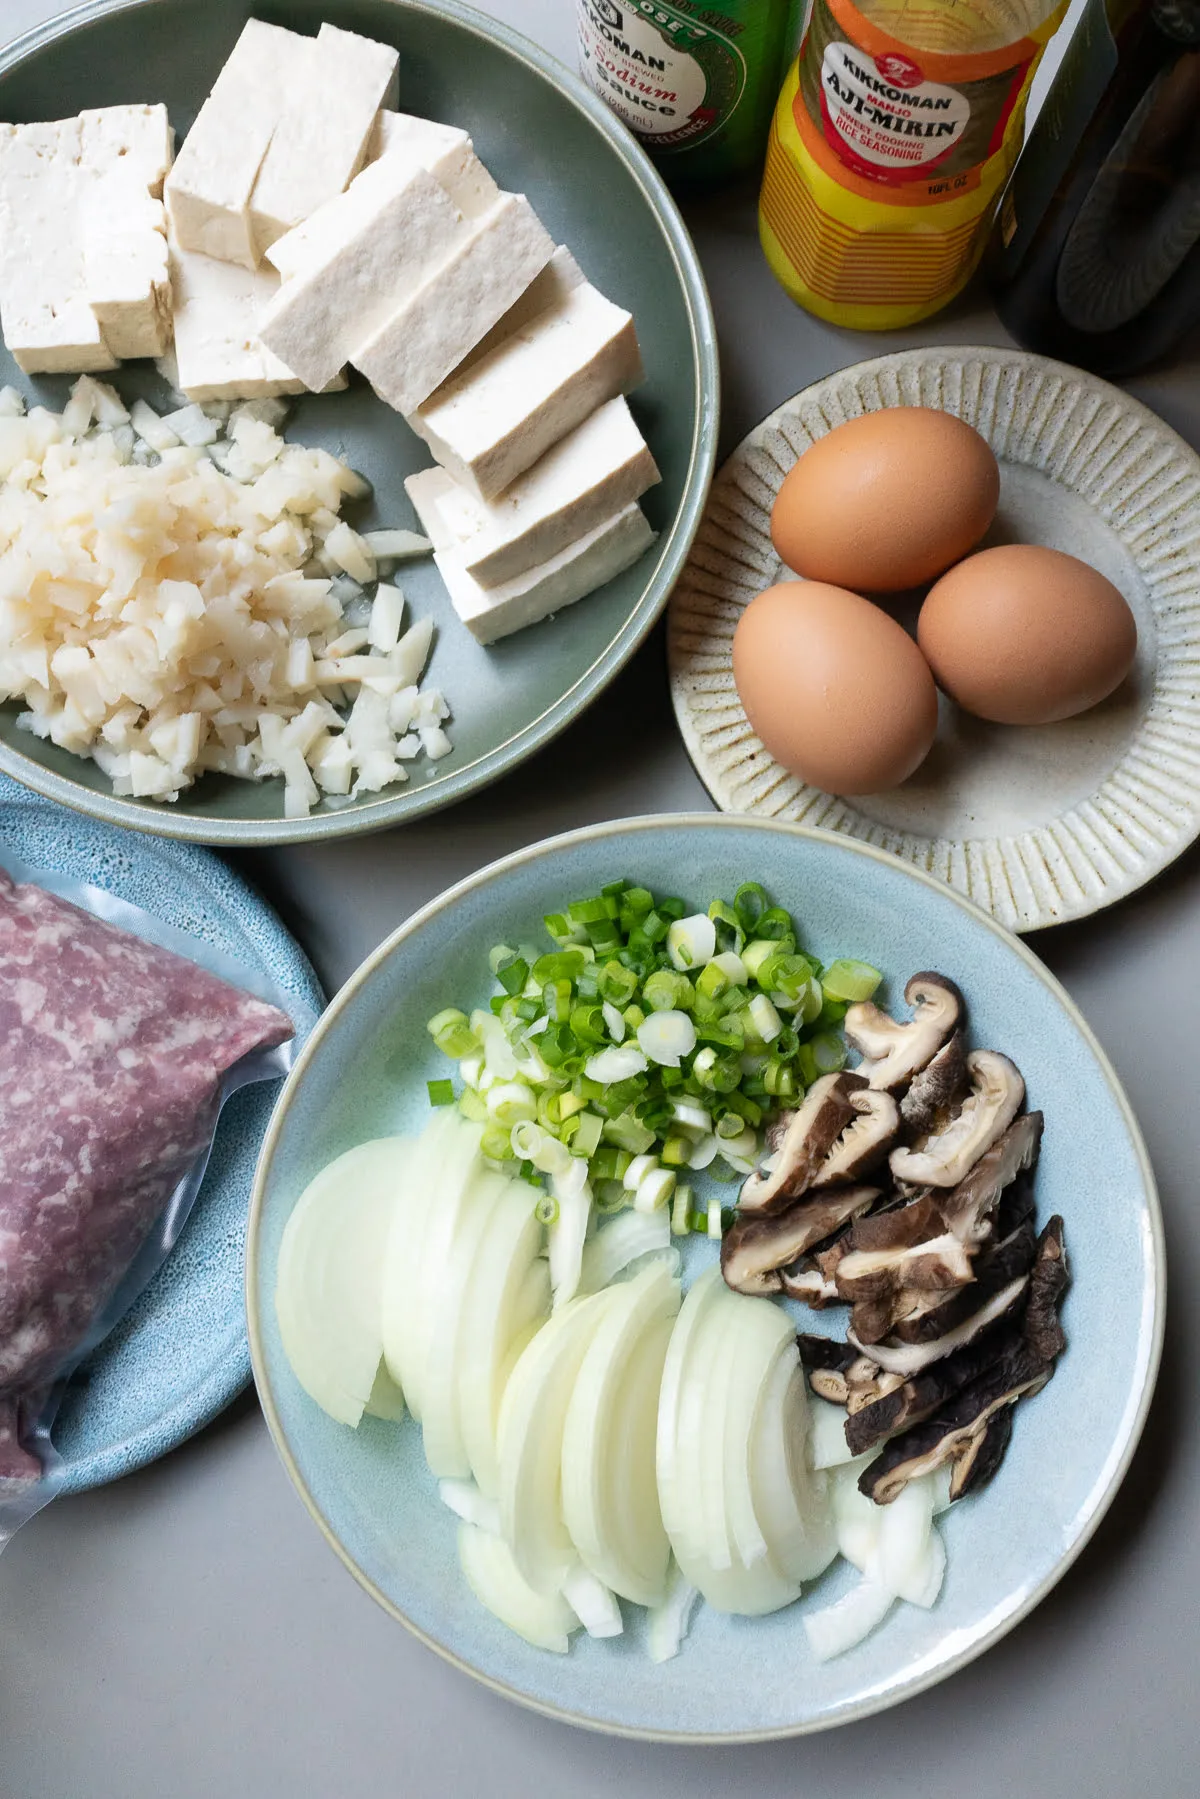 Ingredients for Pork Tofu Casserole (Taiwan Mushi) laid out on a table (ground pork, eggs, onions, mushrooms, green onions, tofu, water chestnuts, soy sauce, and mirin).